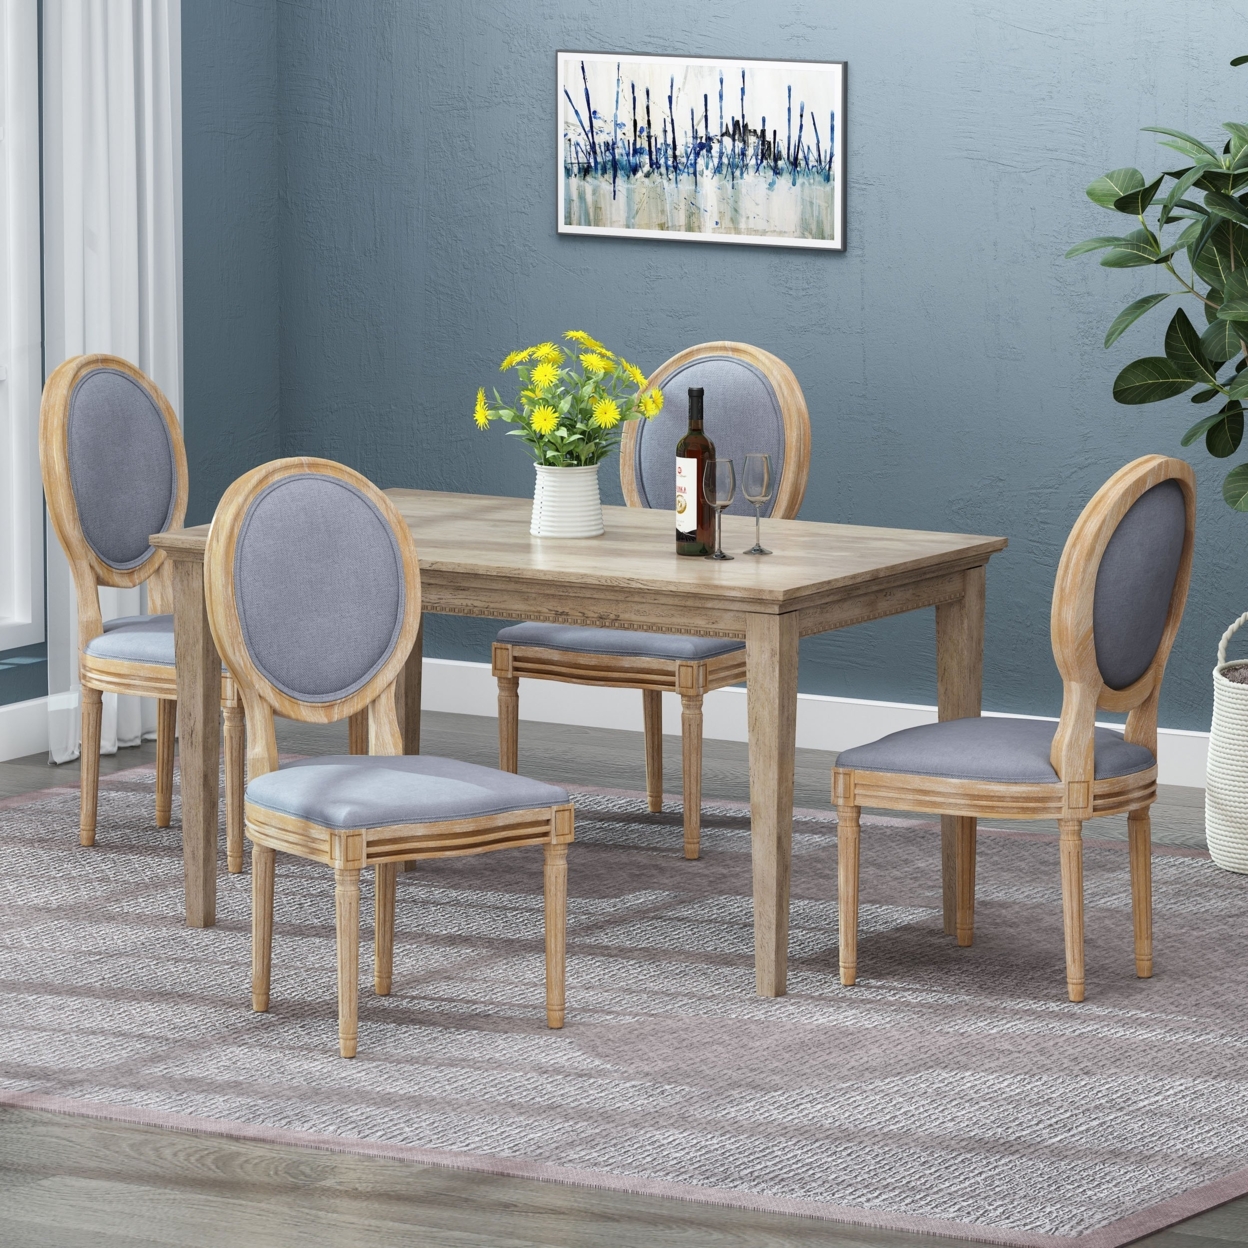 Lariya French Country Dining Chairs (Set Of 4) - Light Gray/natural